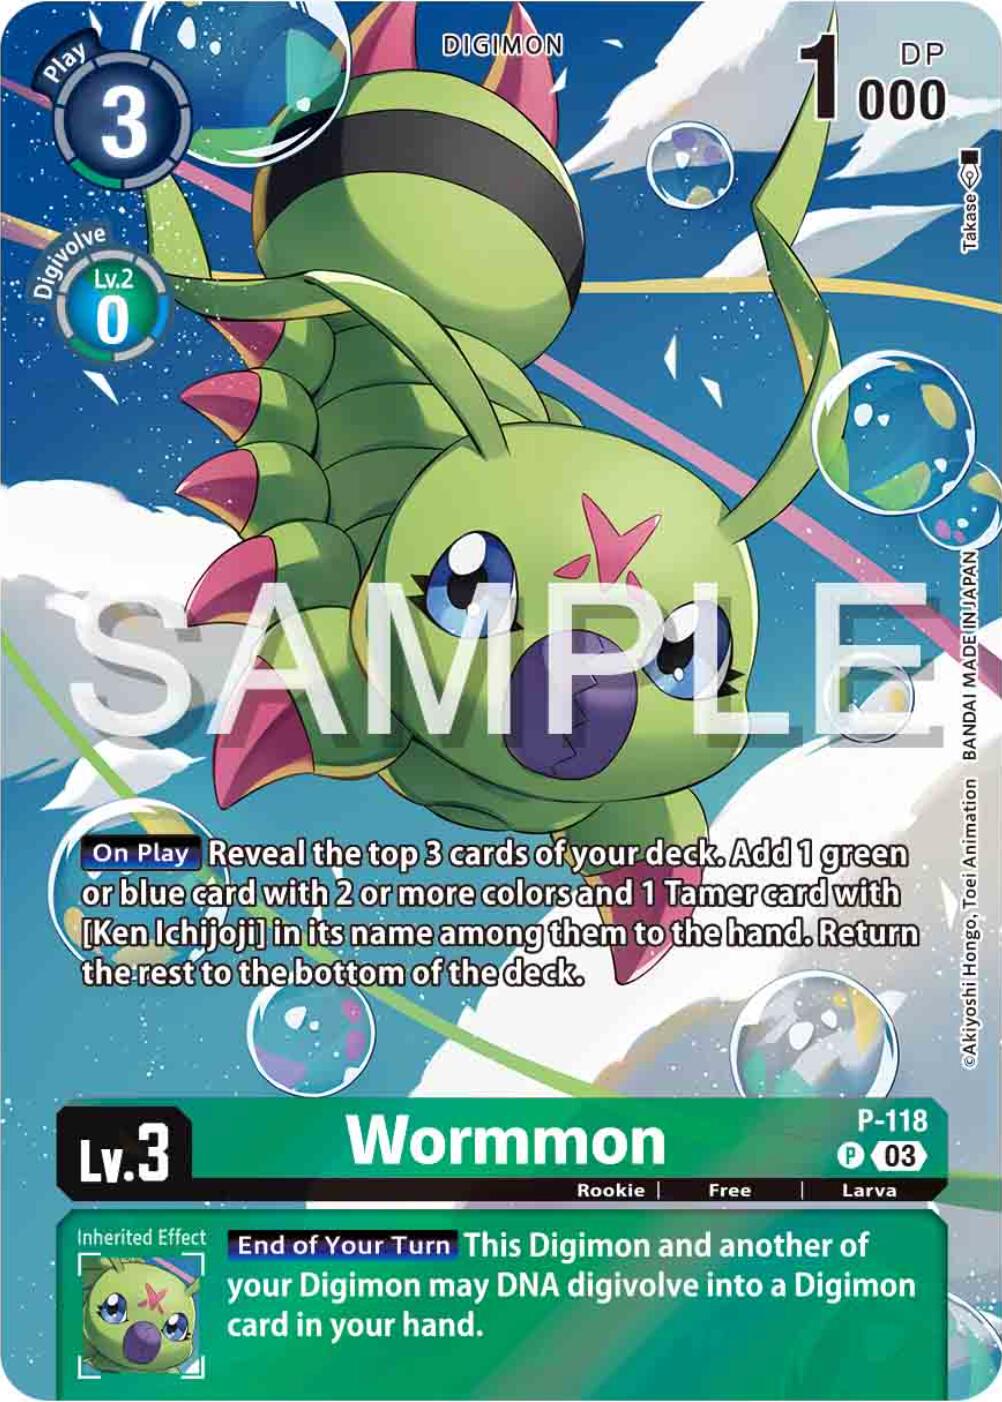 Wormmon [P-118] (Digimon Adventure 02: The Beginning Set) [Promotional Cards] | Amazing Games TCG